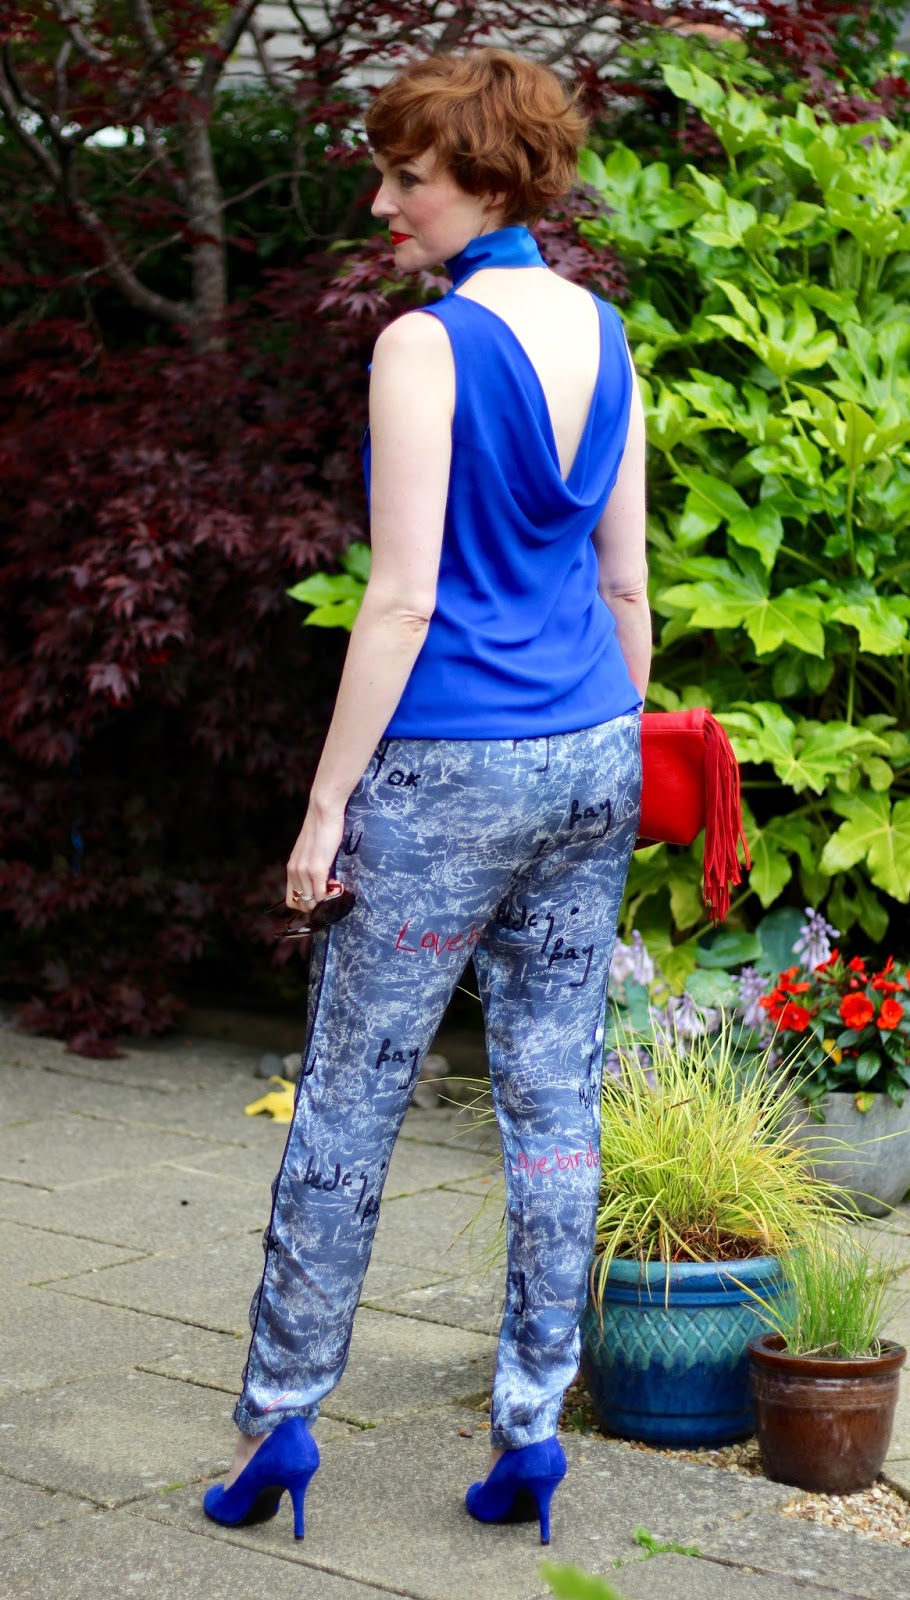 Fake Fabulous | Cobalt blue top worn back to front, pyjama trousers, red lips and blue heels.